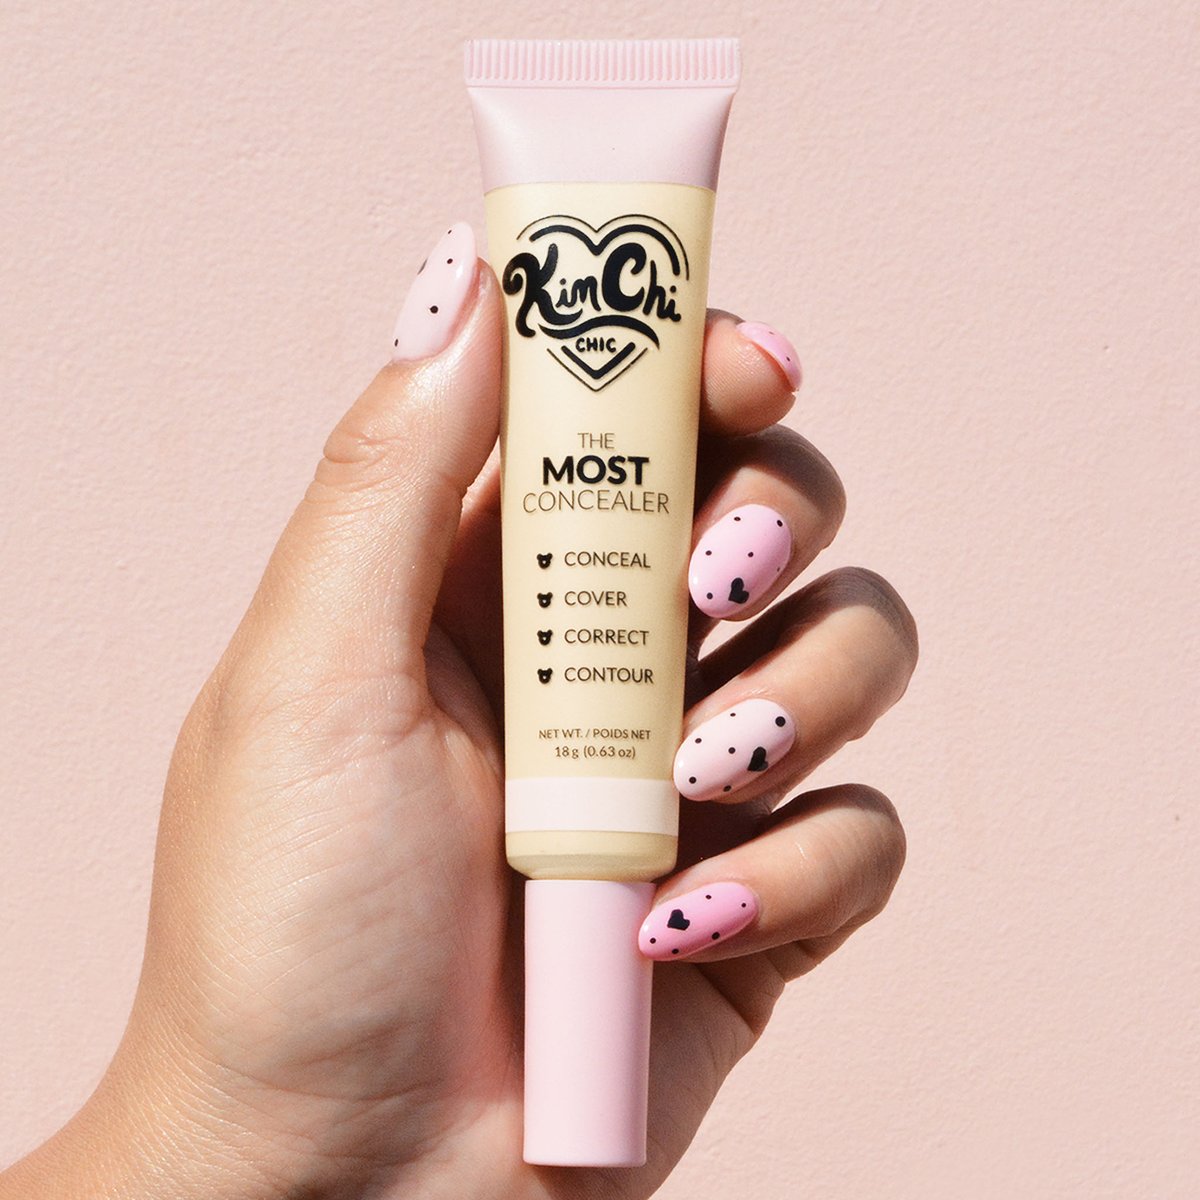 THE MOST CONCEALER